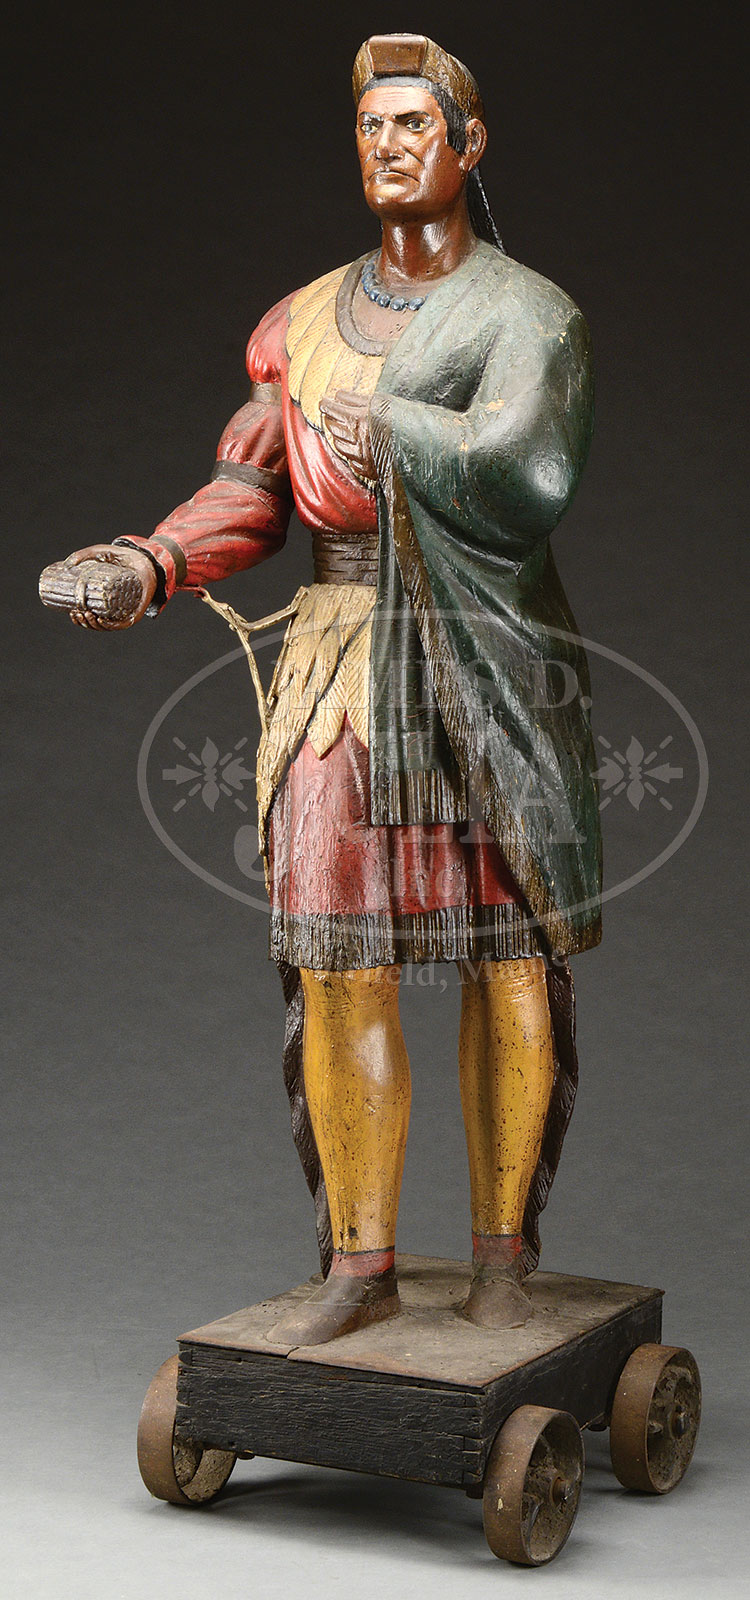 IMPORTANT CARVED AND POLYCHROME PAINTED TOBACCONIST FIGURE OF NATIVE AMERICAN MAN, ATTRIBUTED TO THOMAS BROOKS.